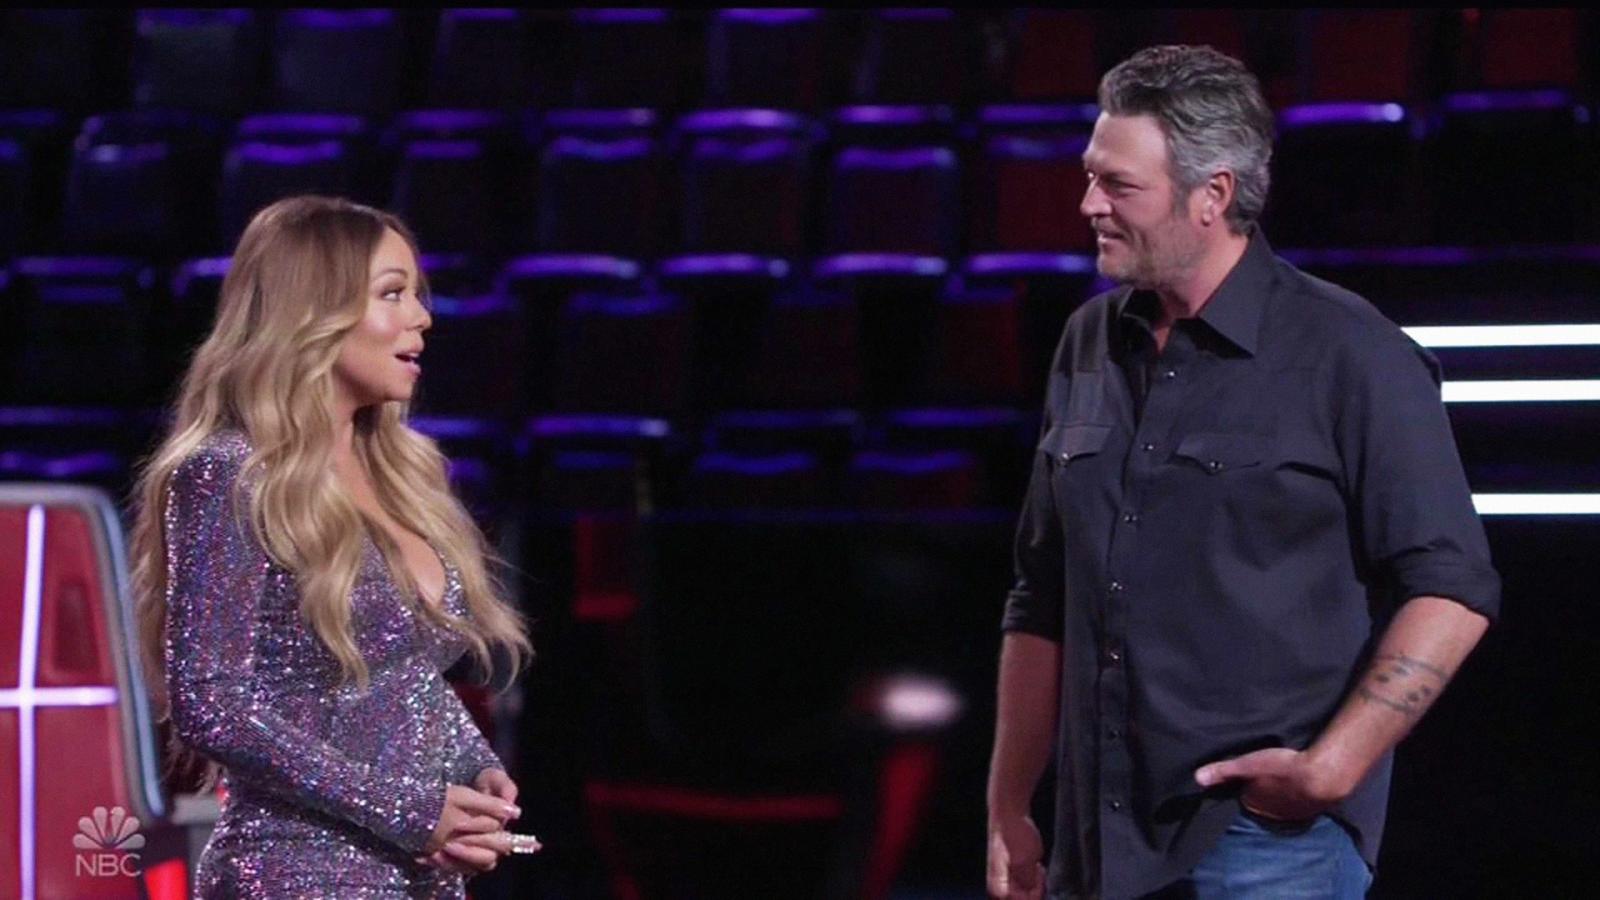 End of an Era: Fans Beg NBC to Cancel The Voice After Blake Shelton's Departure - image 1